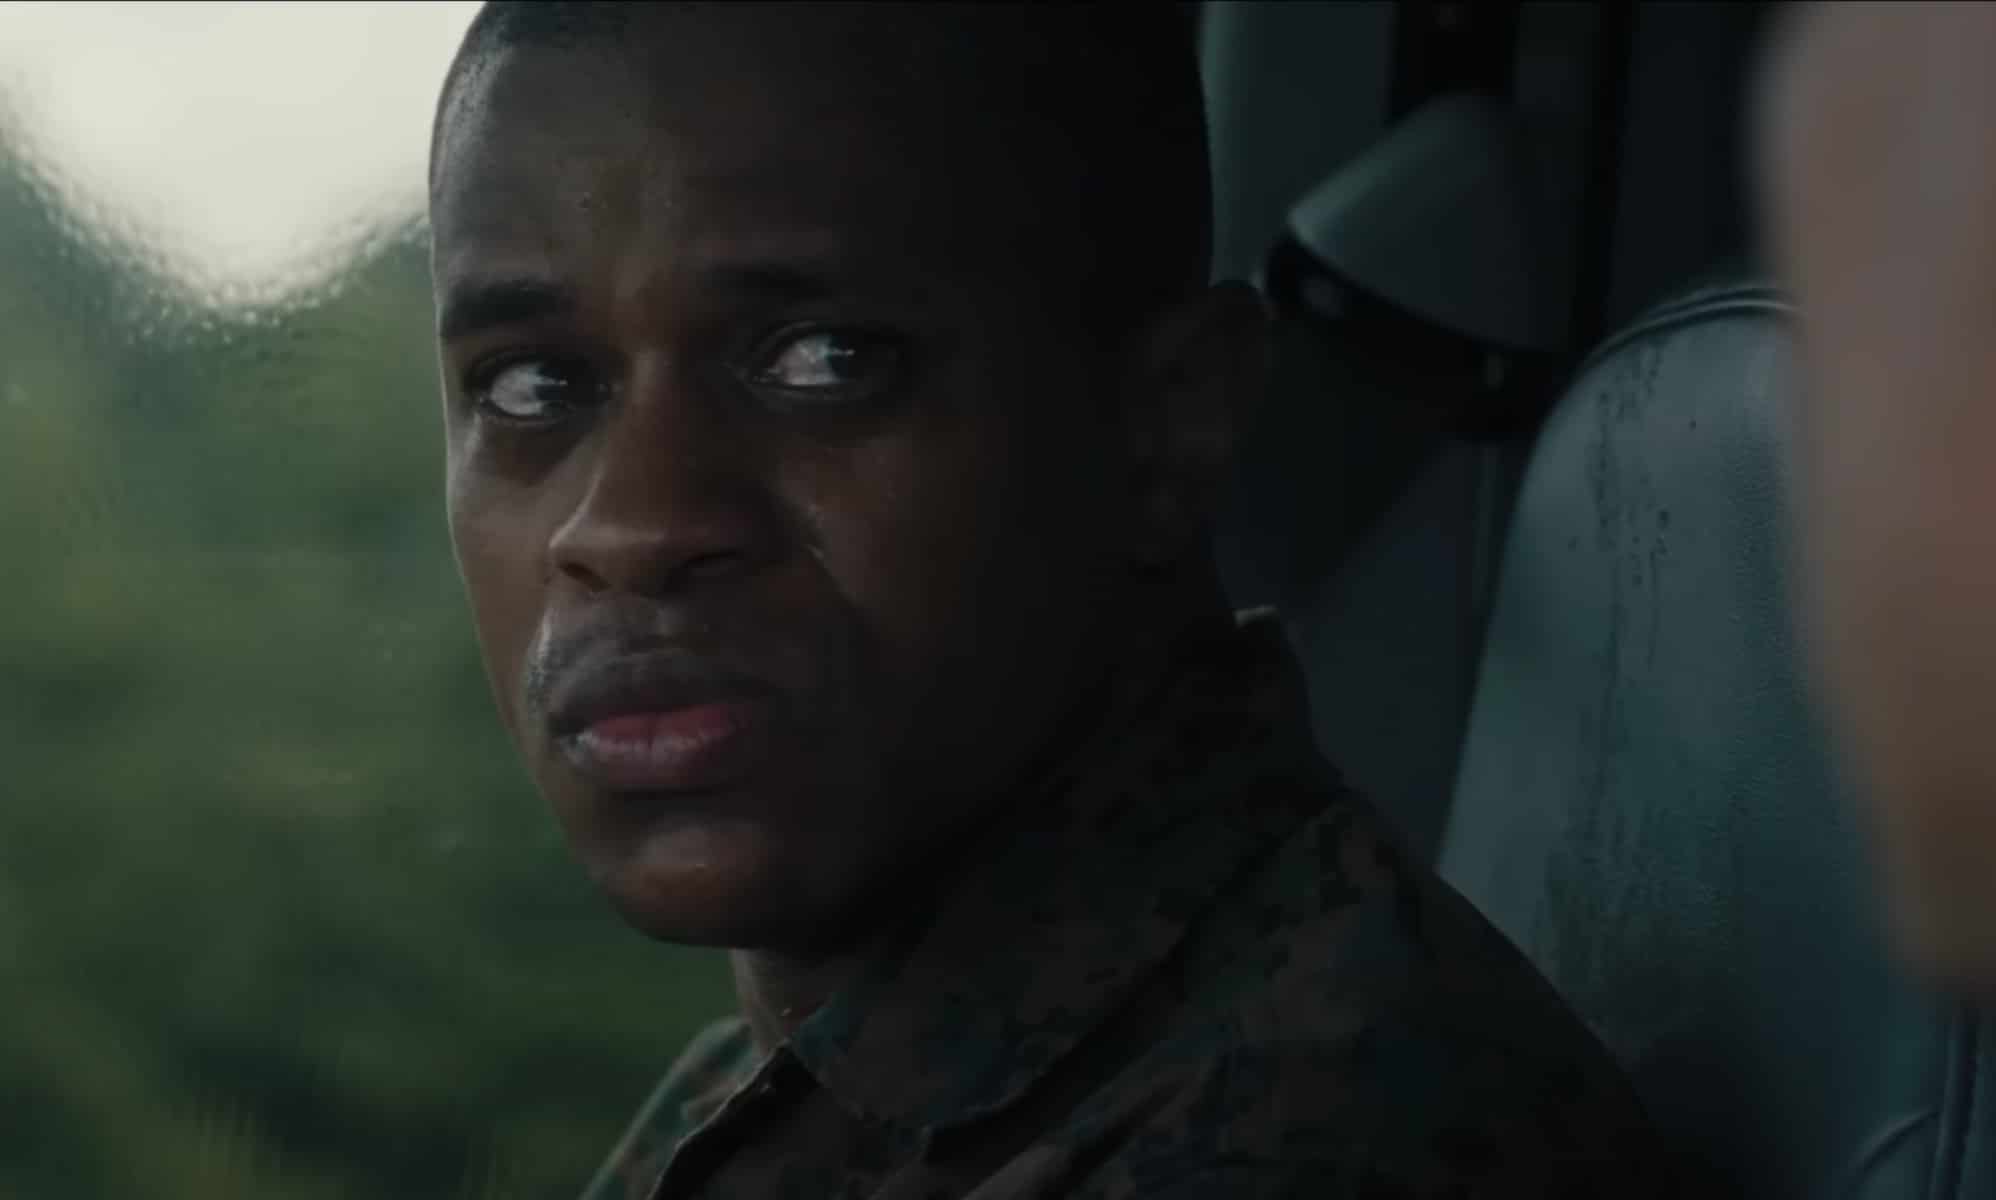 The Inspection: Elegance Bratton tells military story in A24 film